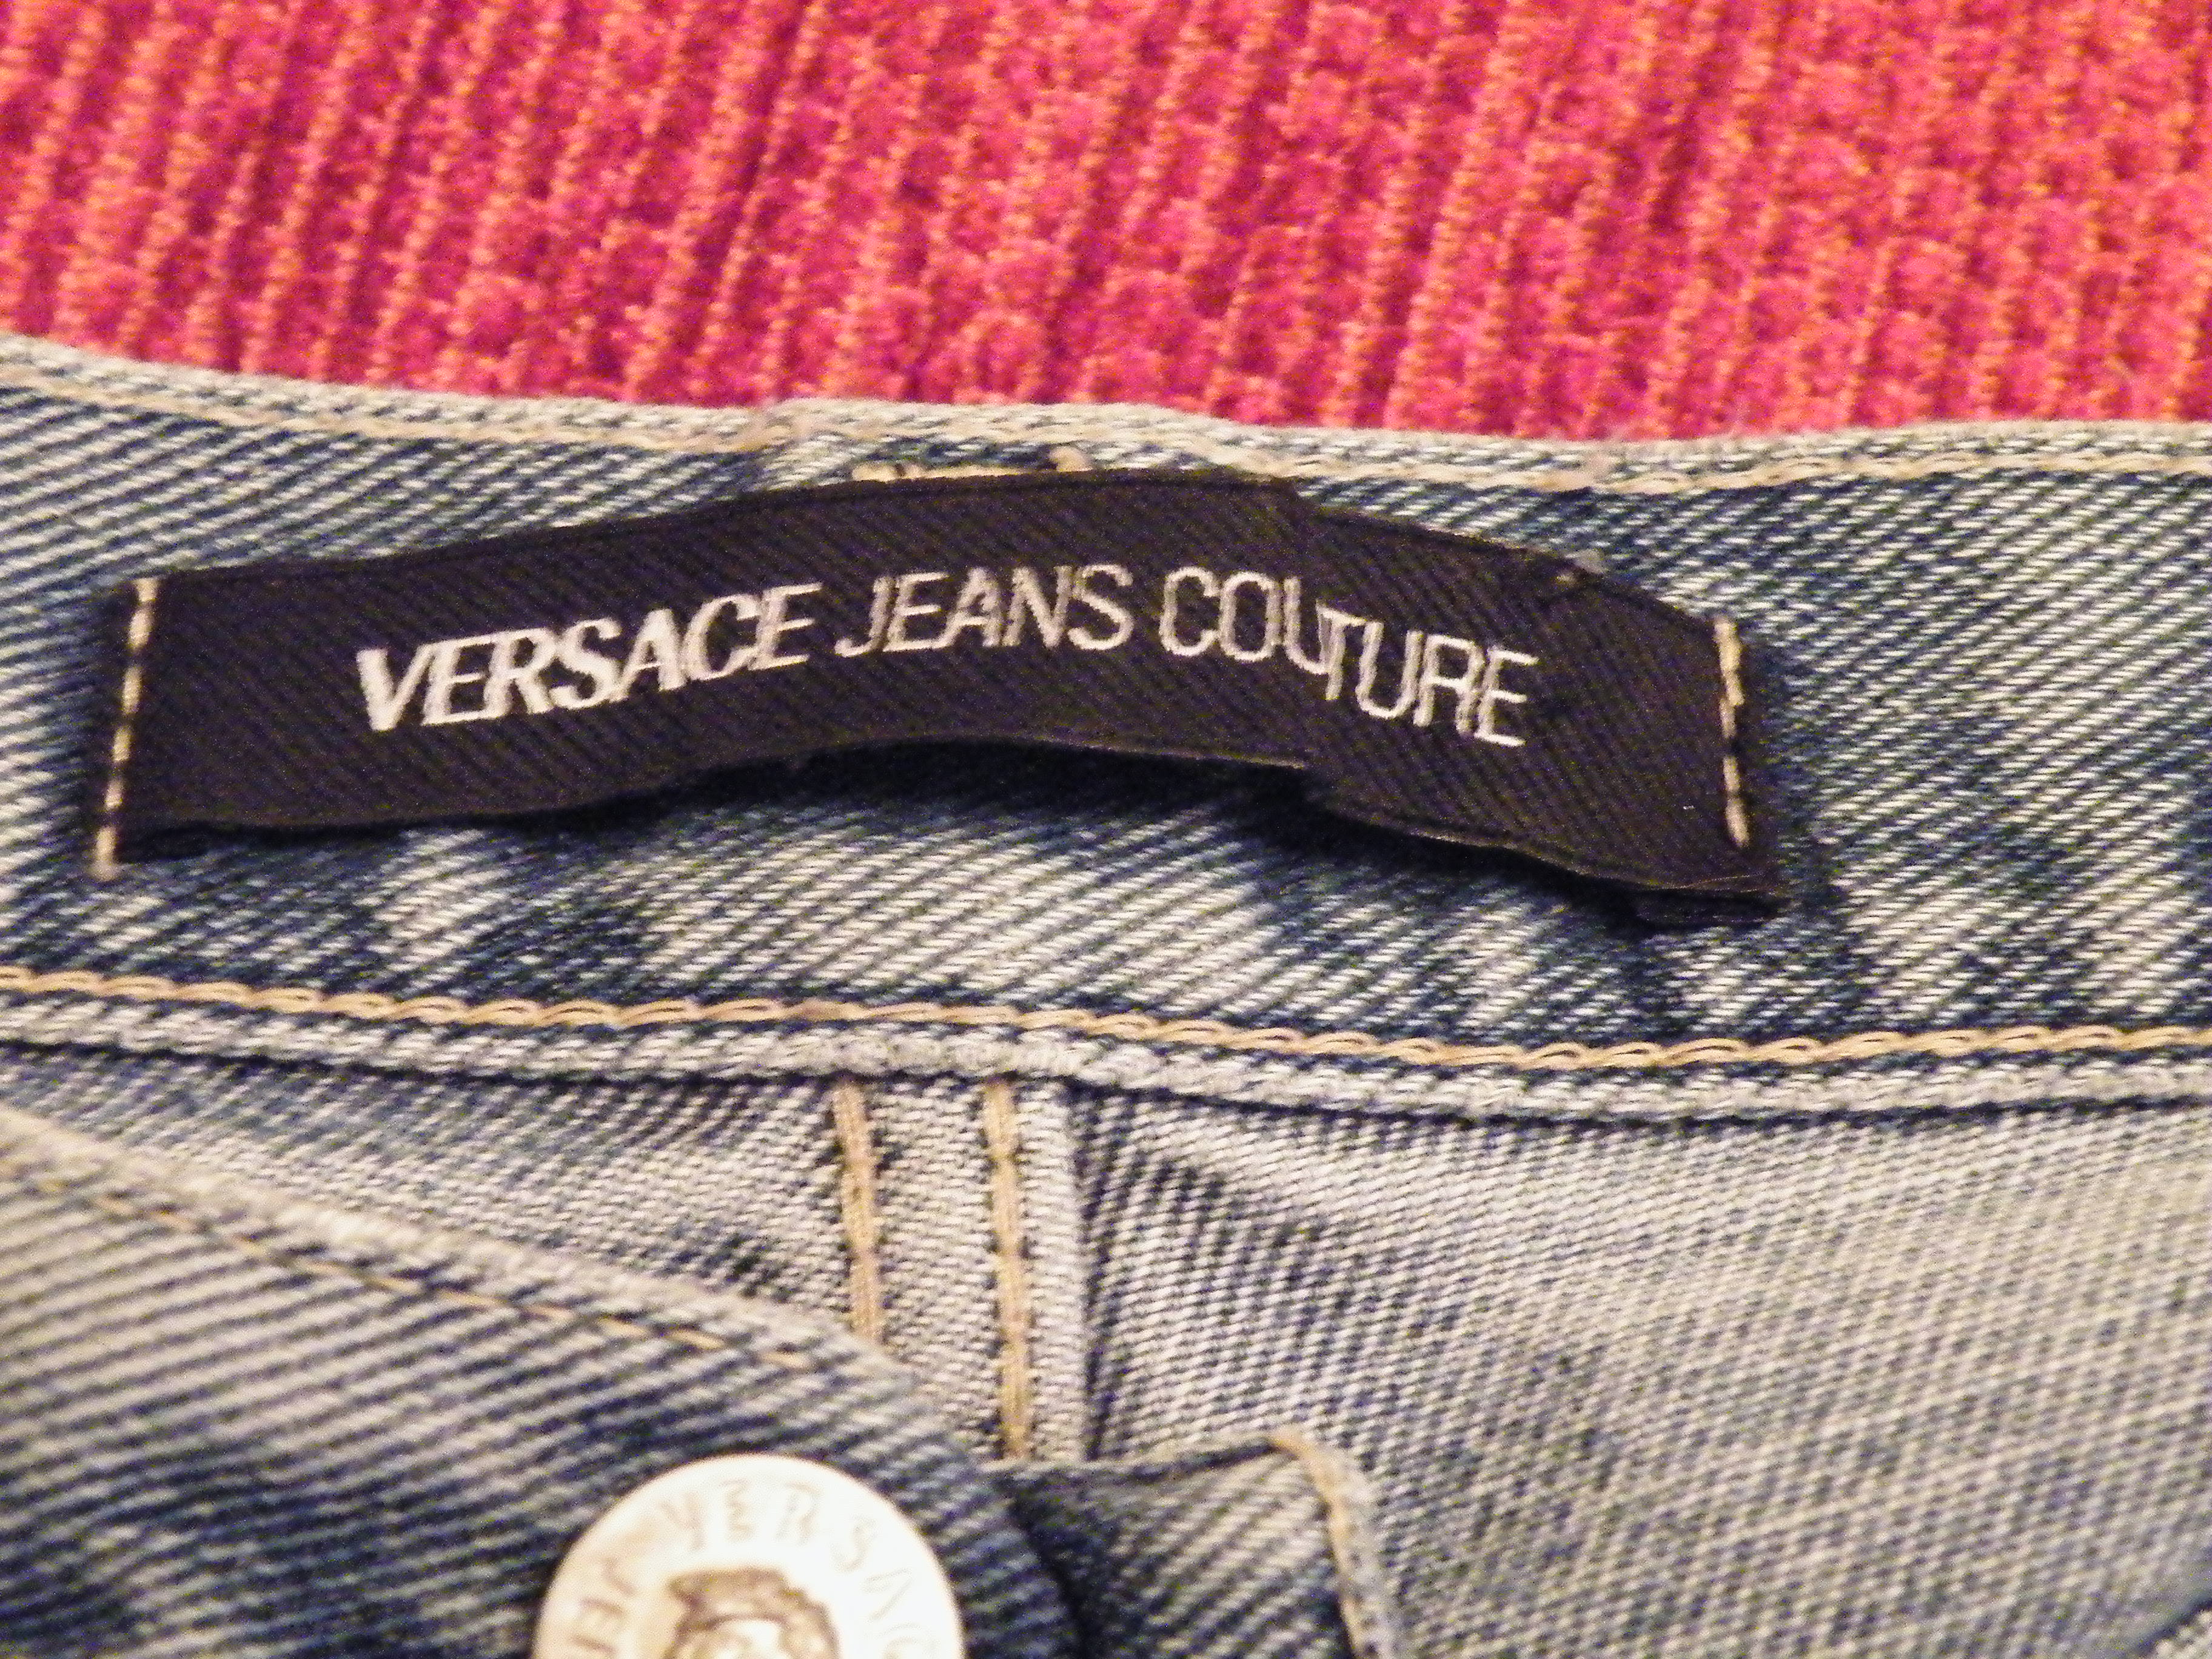 Versace Jeans Real or Fake ? | Styleforum